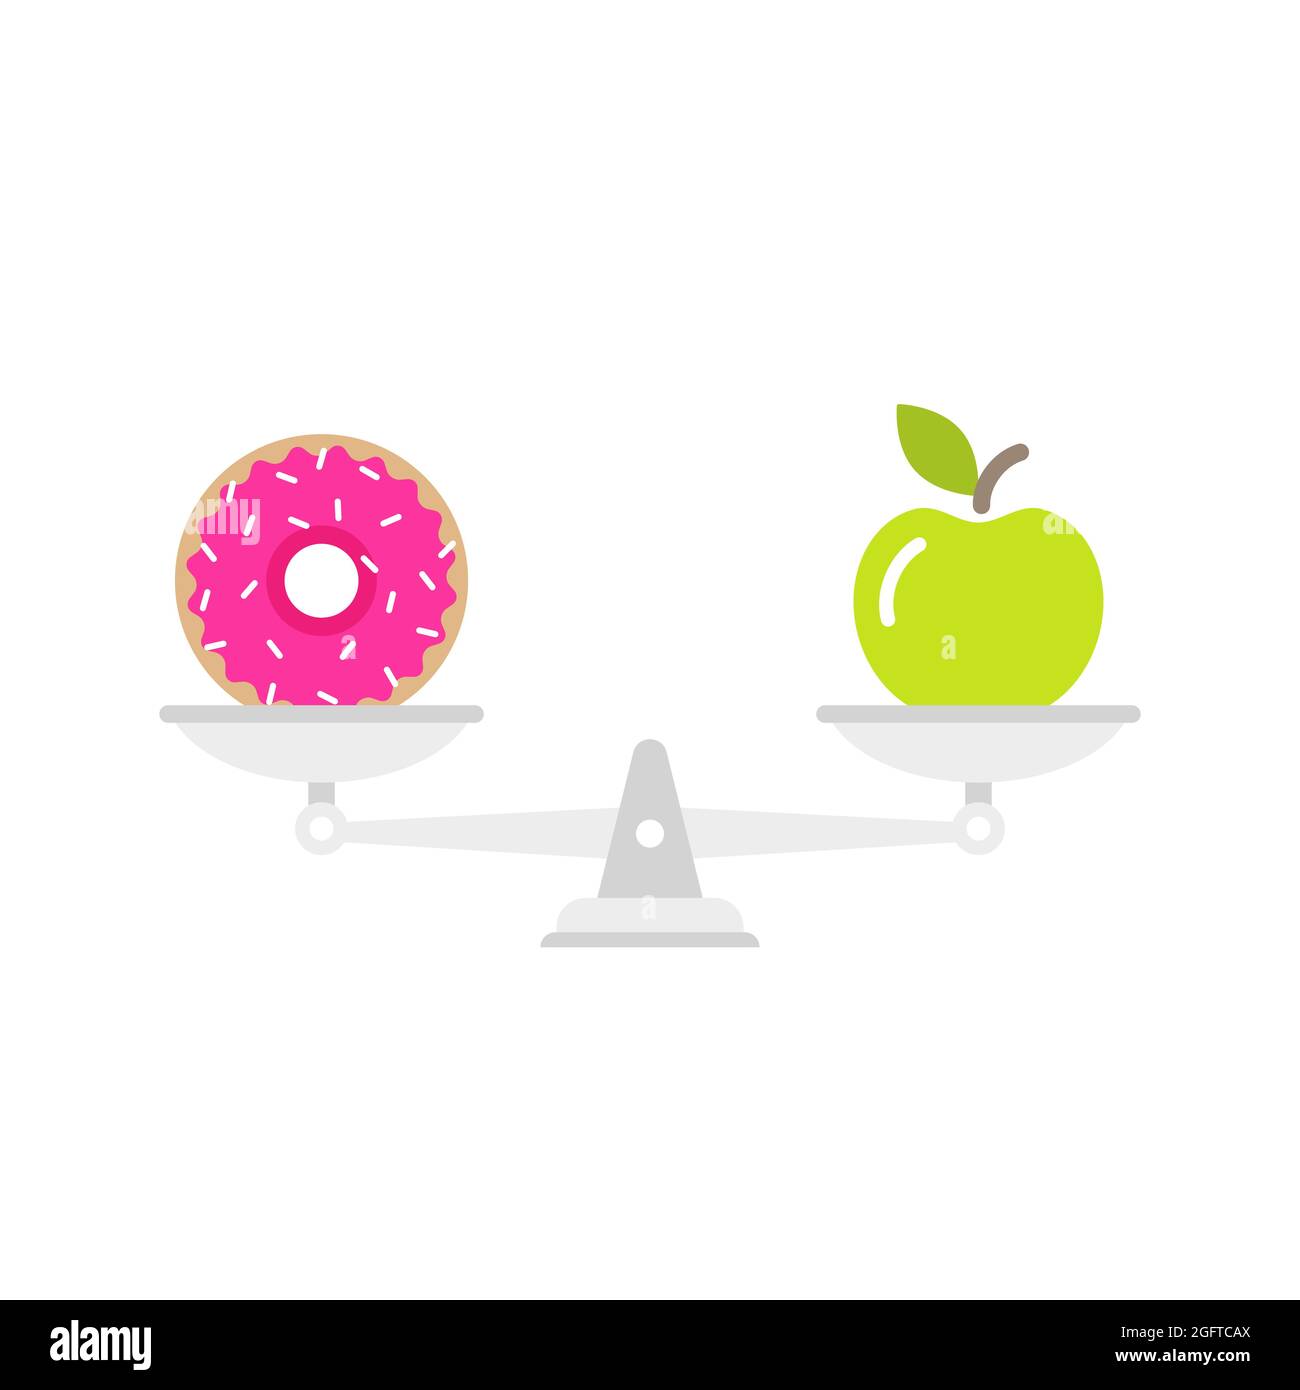 Green apple and doughnut on scales. Diet concept. Healthy and unhealthy food. Weight loss, healthy lifestyle, proper nutrition. Vector flat illustrati Stock Vector